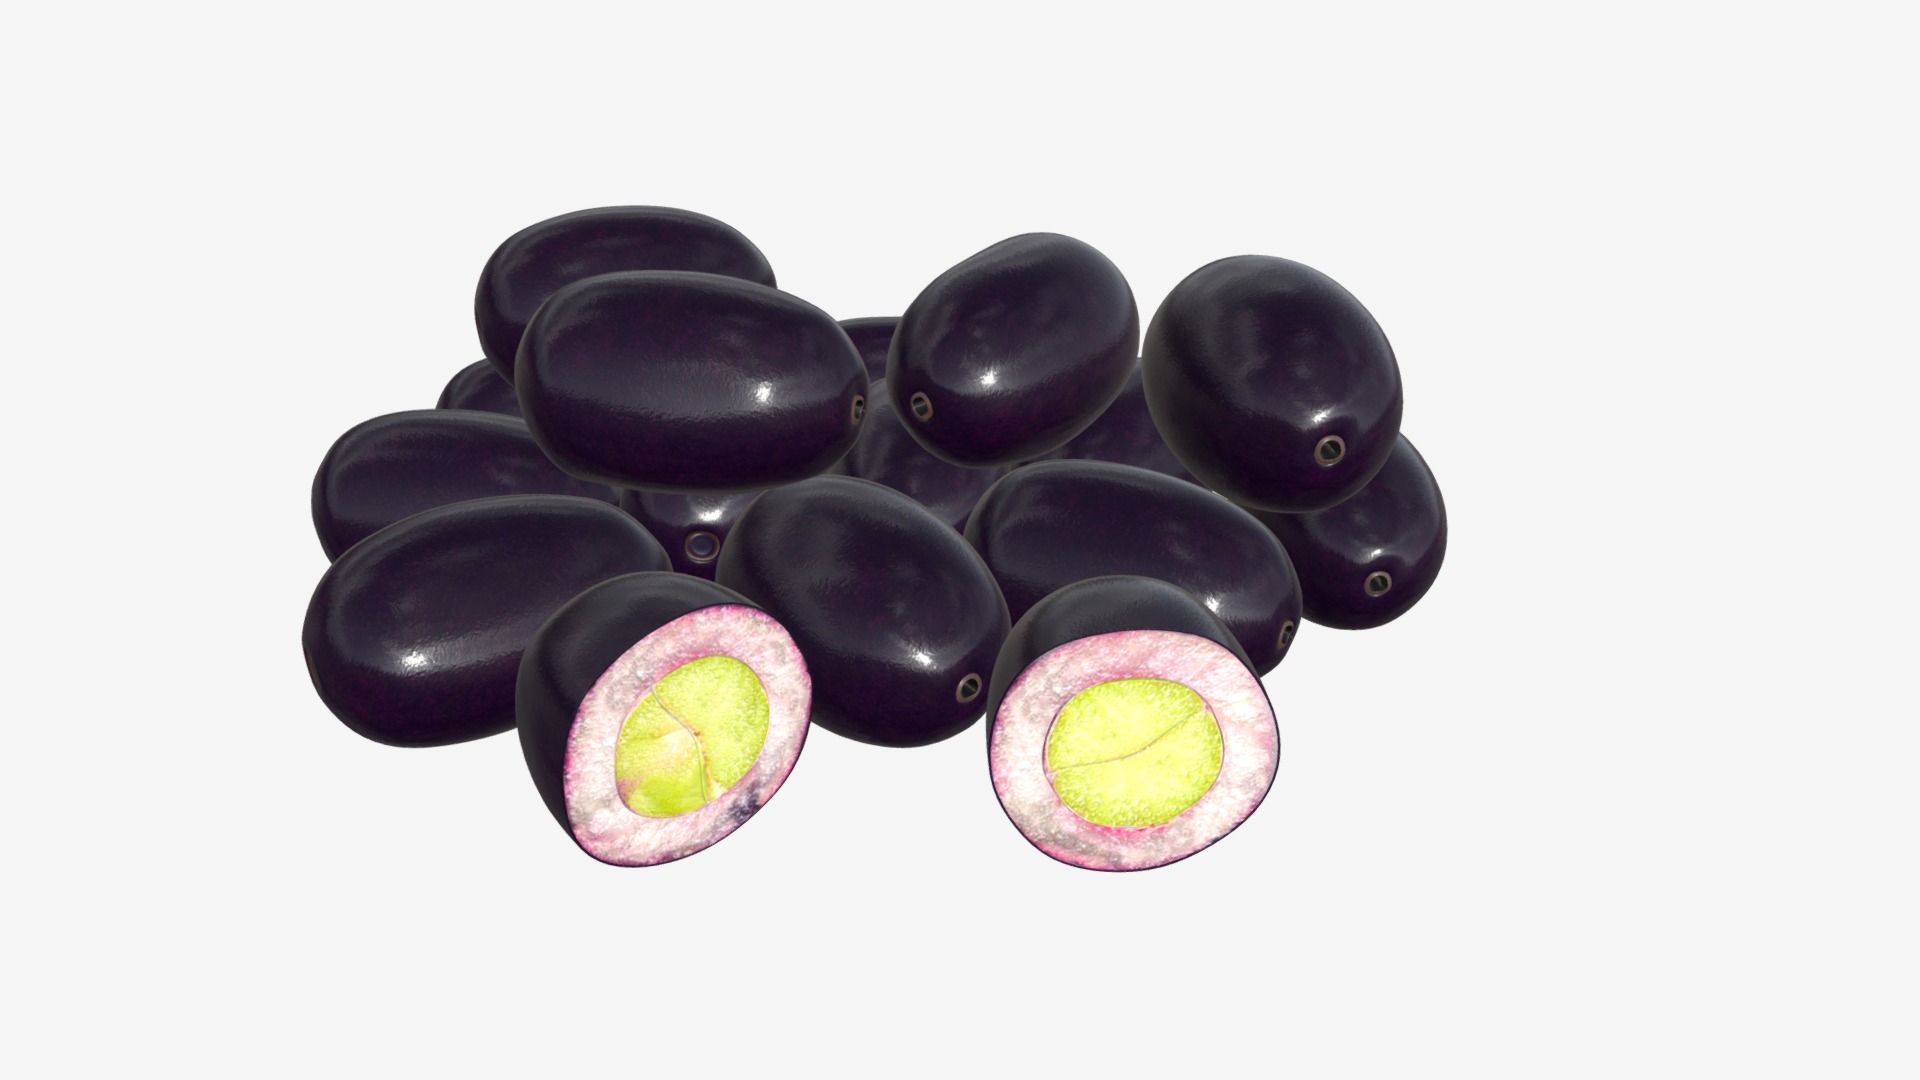 3D model Jambolan plums whole and half sliced - This is a 3D model of the Jambolan plums whole and half sliced. The 3D model is about a black and red video game controller.